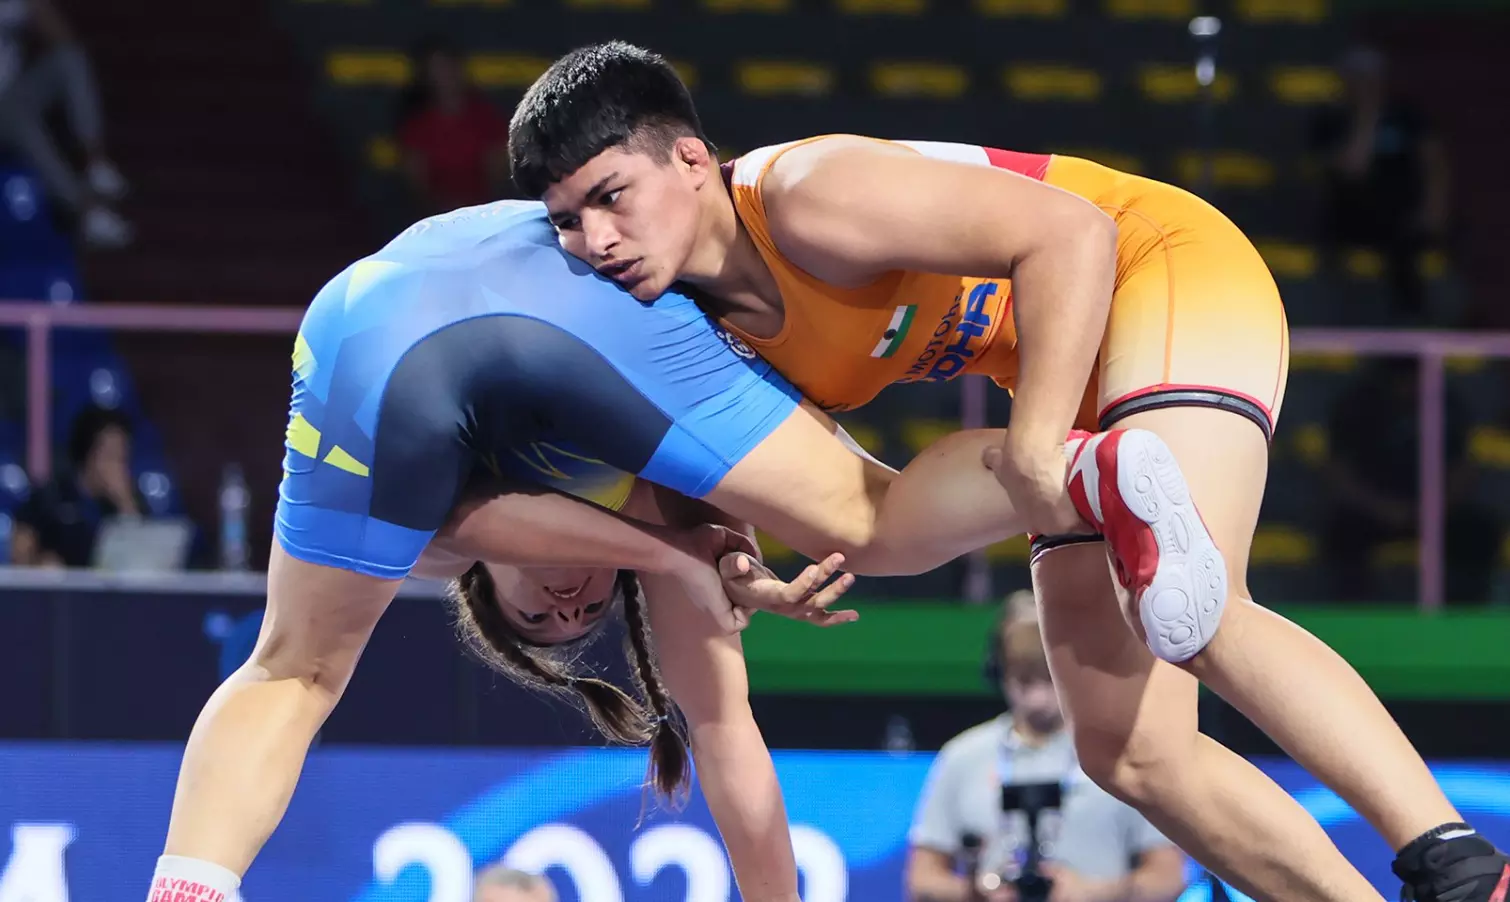 Despite WFI suspension, wrestling trials for 2023 World Championships to proceed as scheduled